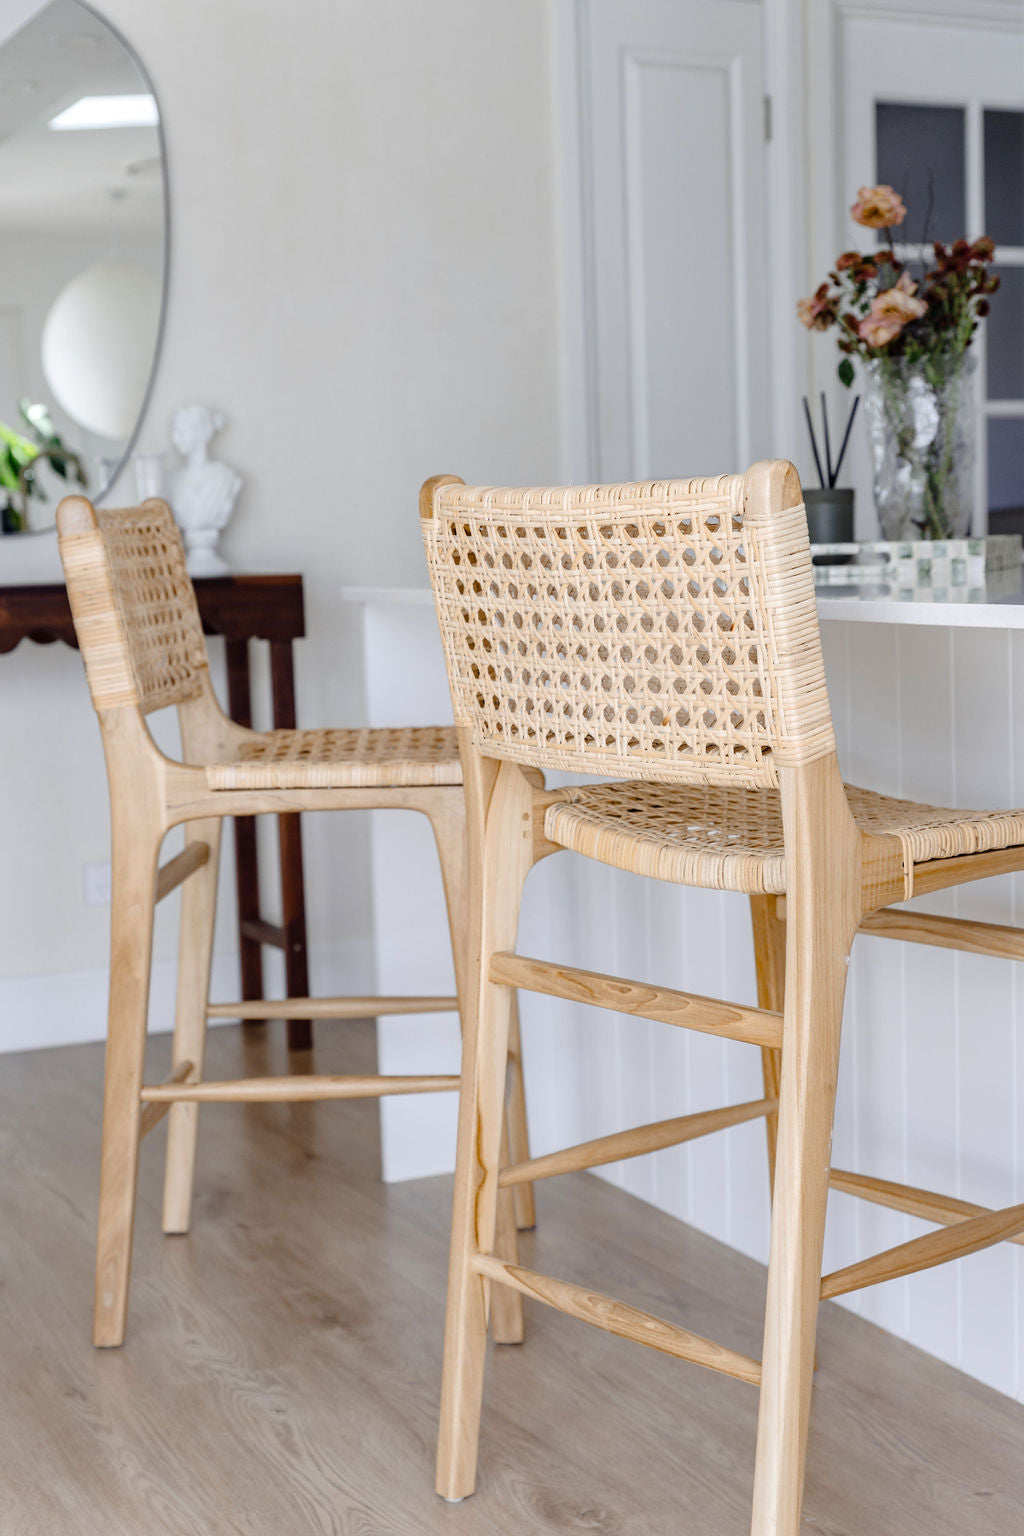 The Amira counter stool with back rest